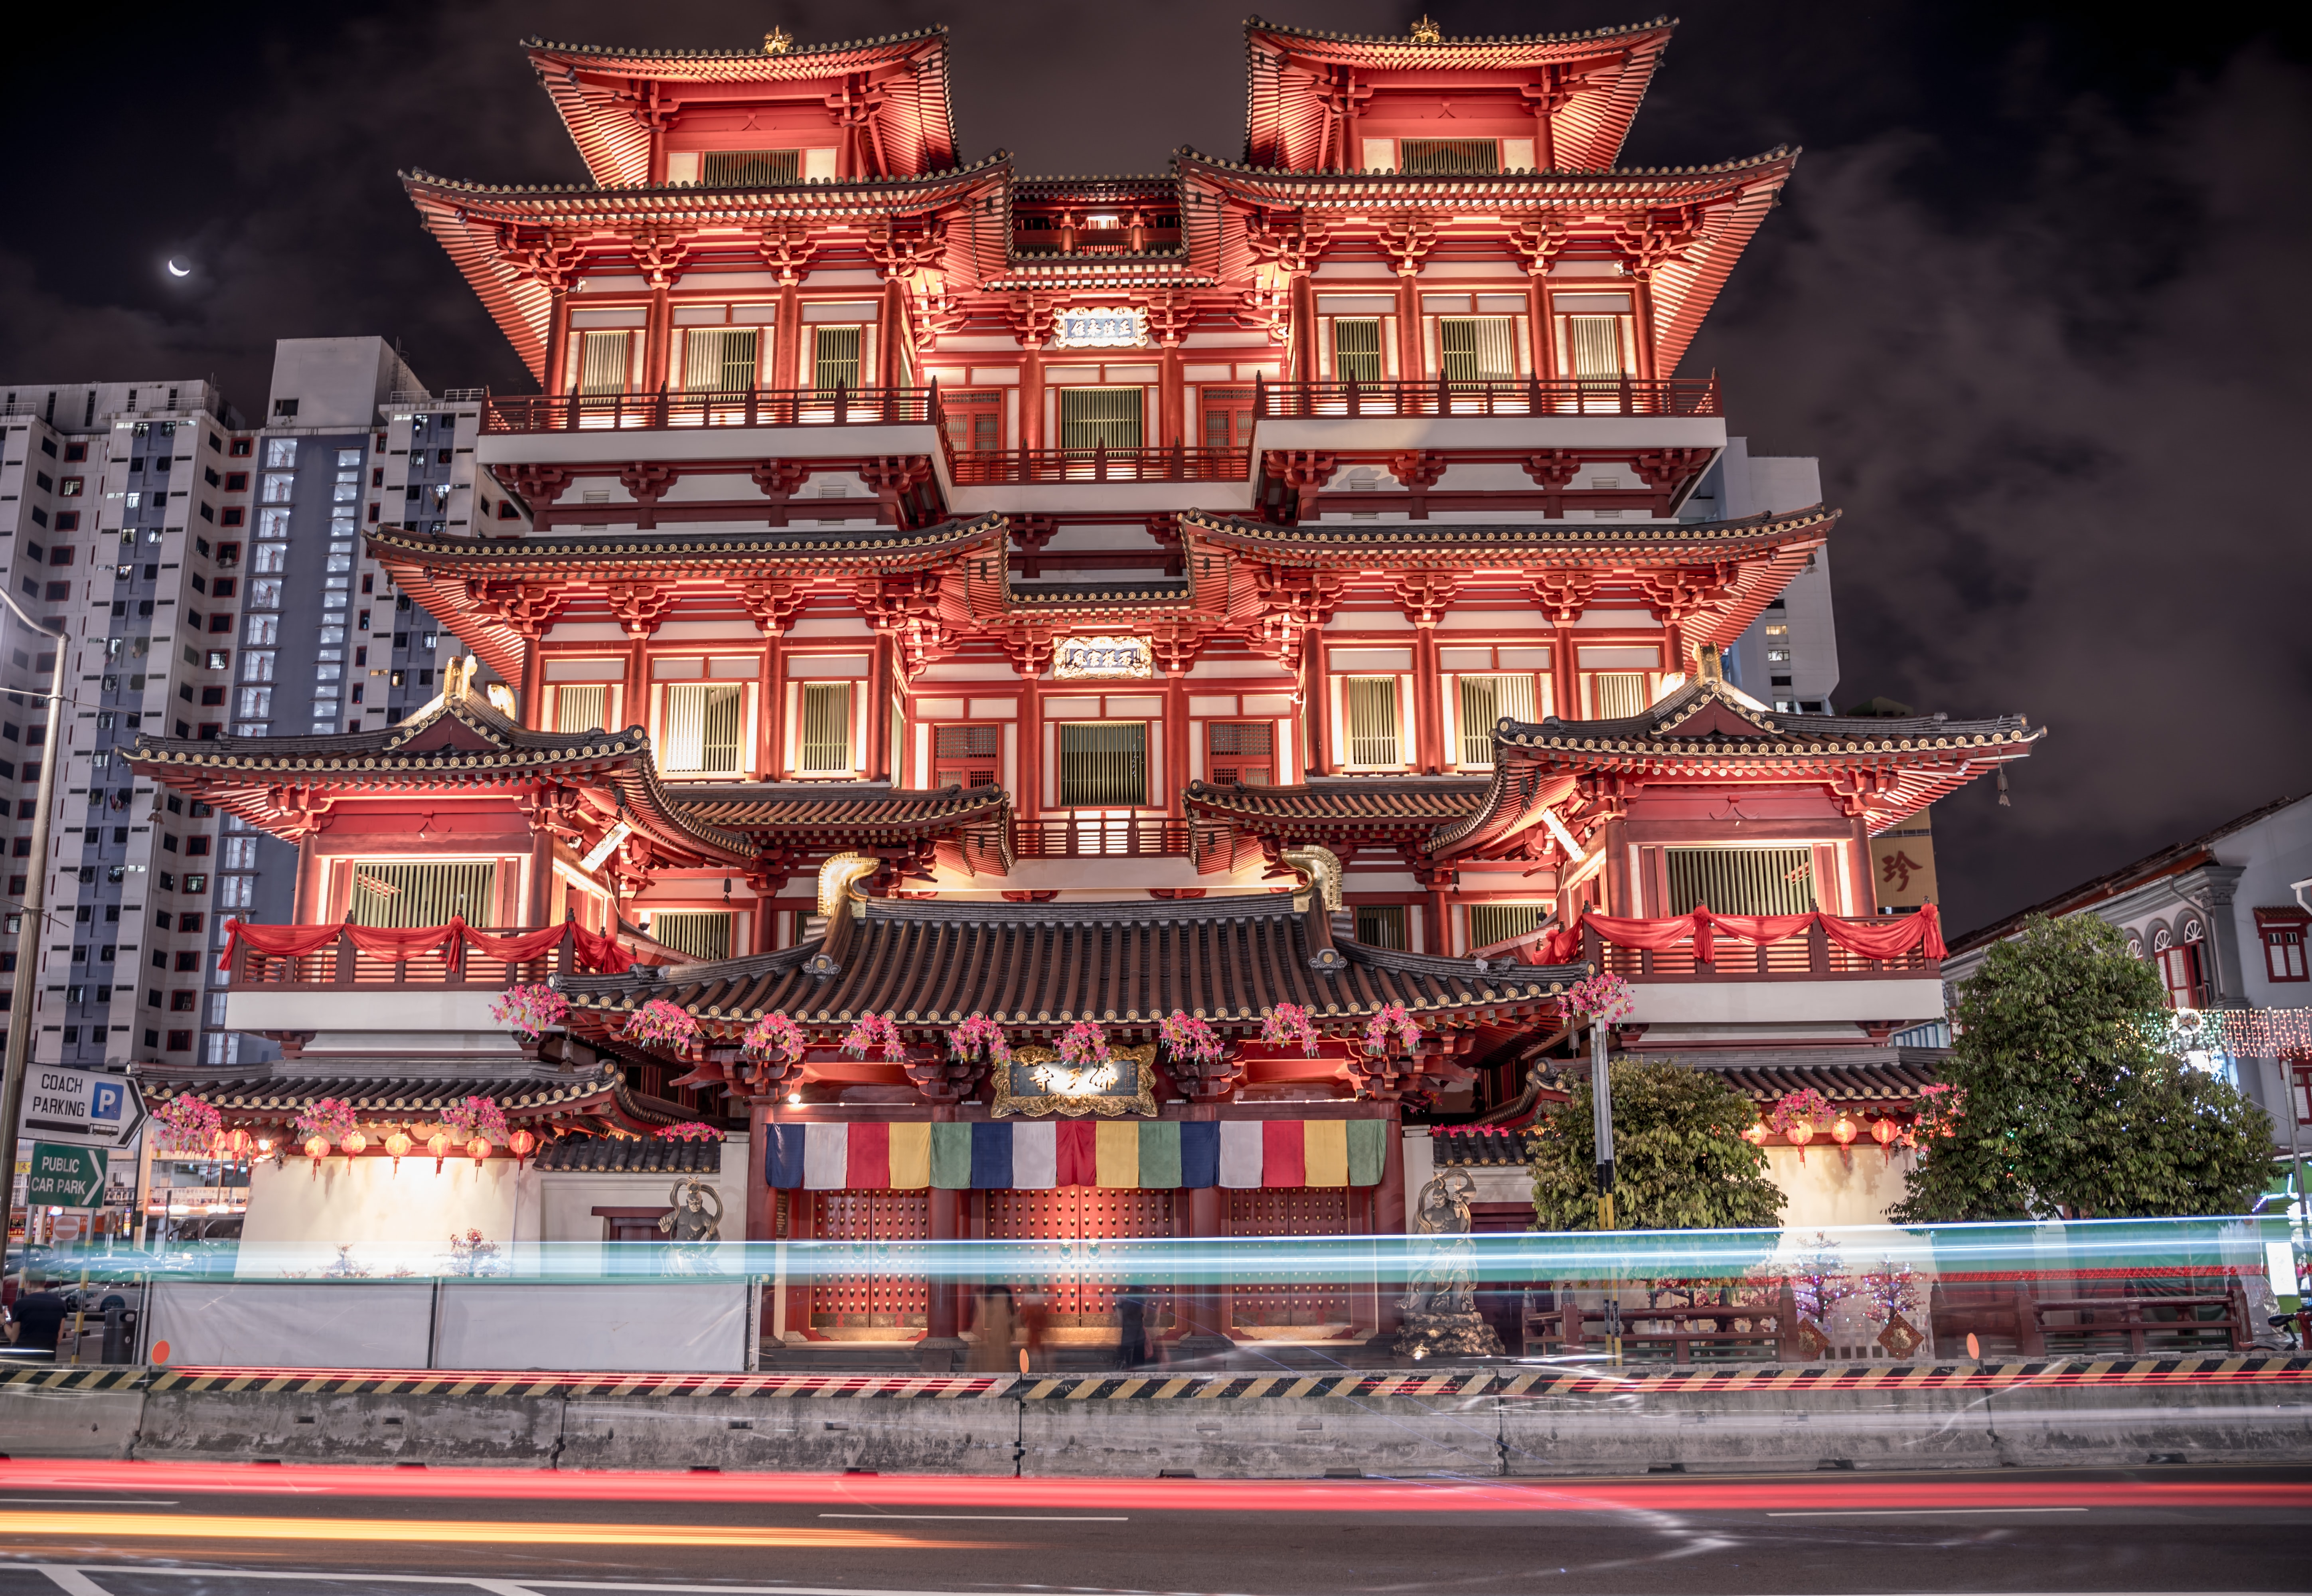 Chinatown heritage Center, 5 underrated places to visit in Singapore